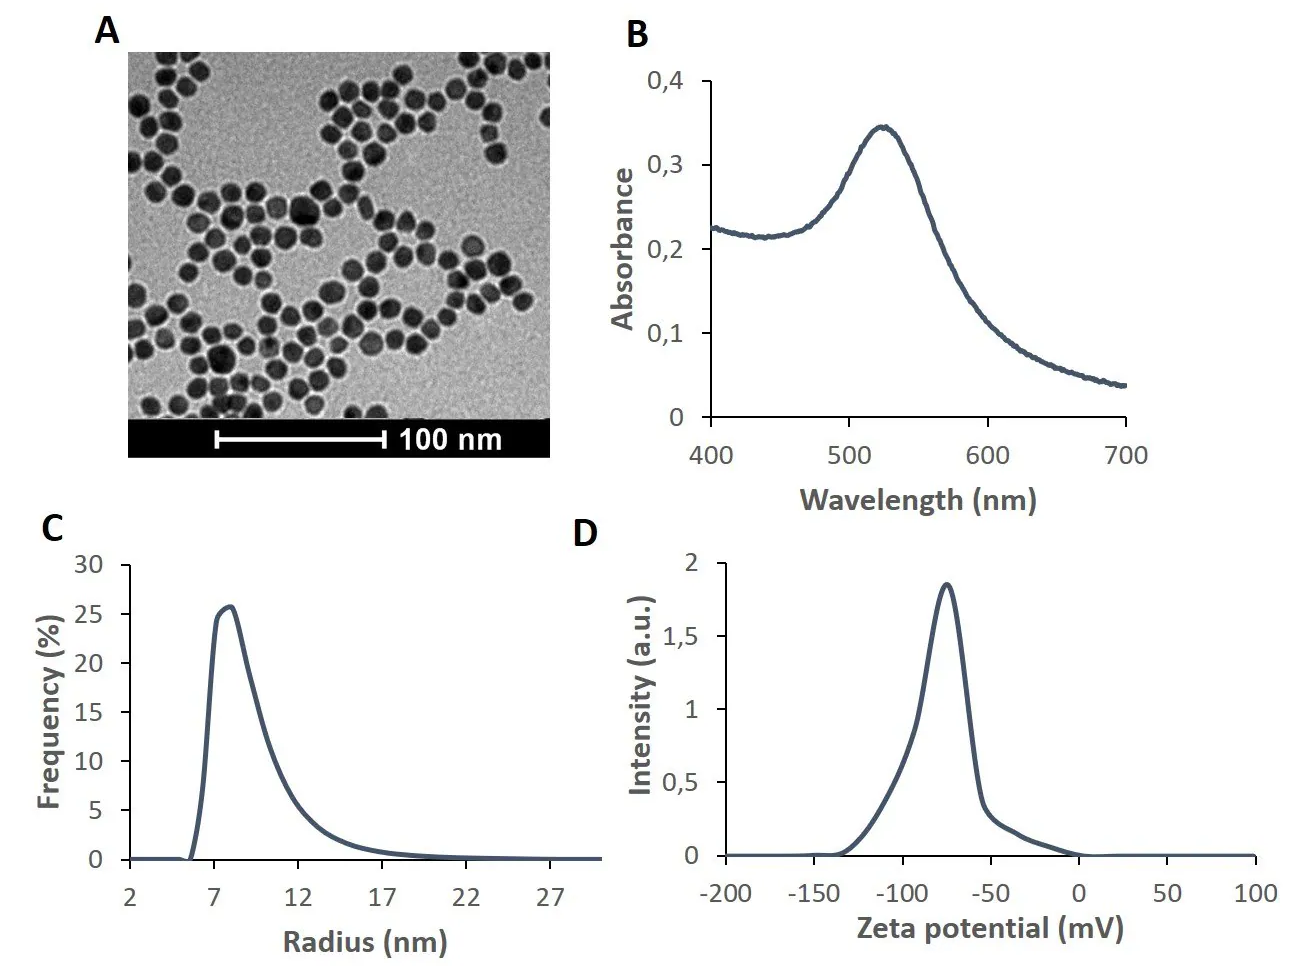 Characterization of AuNPs synthesized by the citrate reduction method. Several standard and straightforward techniques used for characterization of AuNPs, such as A) Transmission Electron Microscopy (TEM), showing the spherical shape with good size dispersion; B) UV-visible spectroscopy, where the LSPR peak is used for the assessment of size and stability; C) Dynamic Light Scattering (DLS), which measures the hydrodynamic radii of AuNPs, thus highlighting the size dispersion; and D) zeta potential, which provides information of the superficial charge of the AuNPs, thus an assessment of stability. Altogether, these data are easy to acquire and provide enough information for manufacturing characterization.